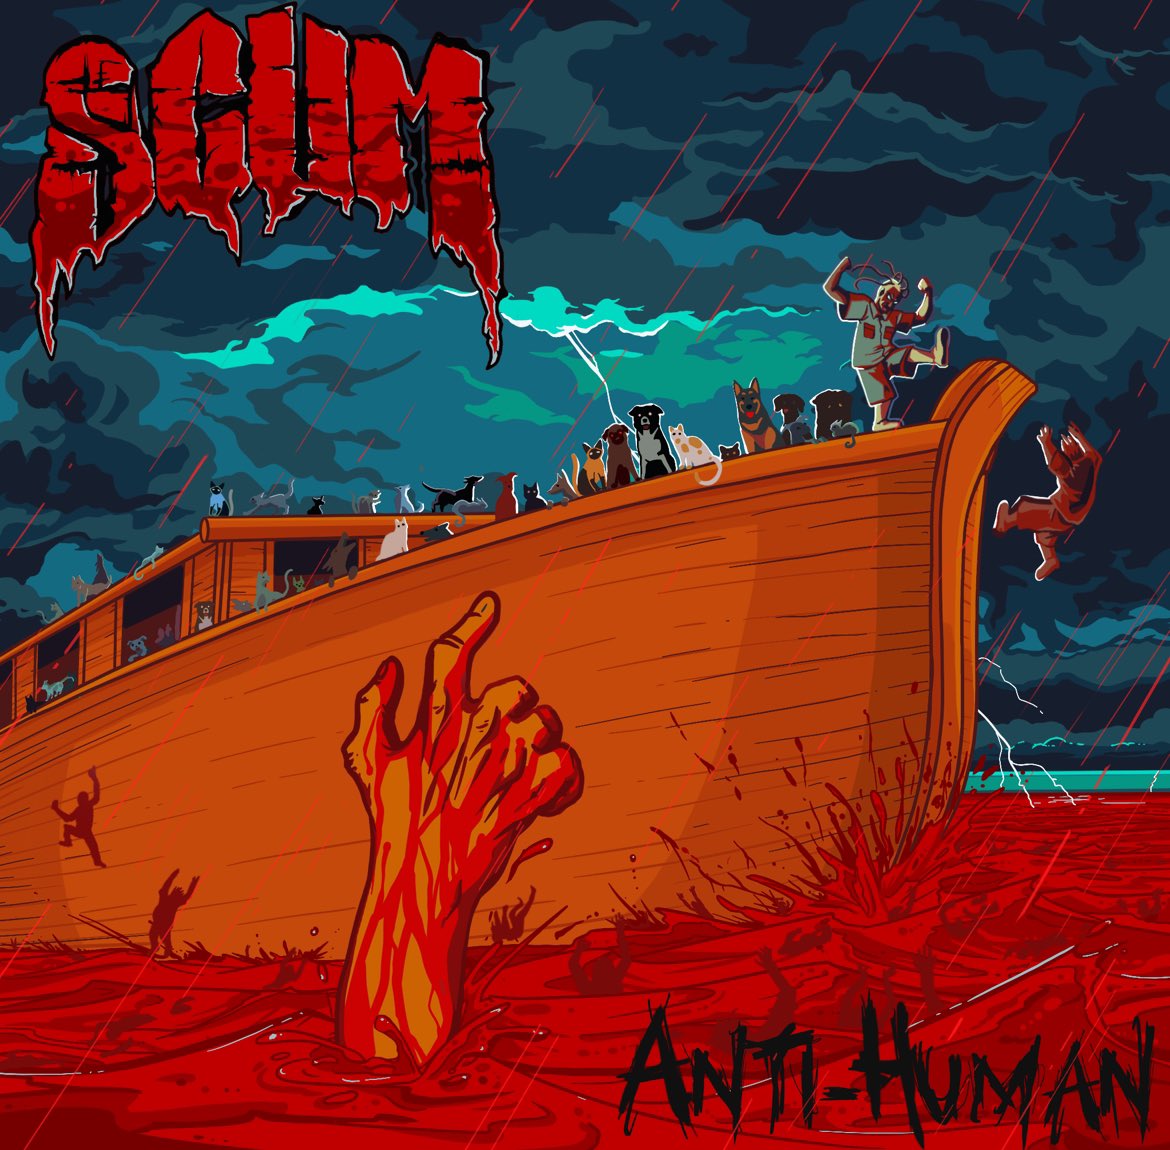 .@SCUM412 ‘s “Anti-Human” is heading your way April 26th‼️ Pre orders are live at gorehop.com 😈